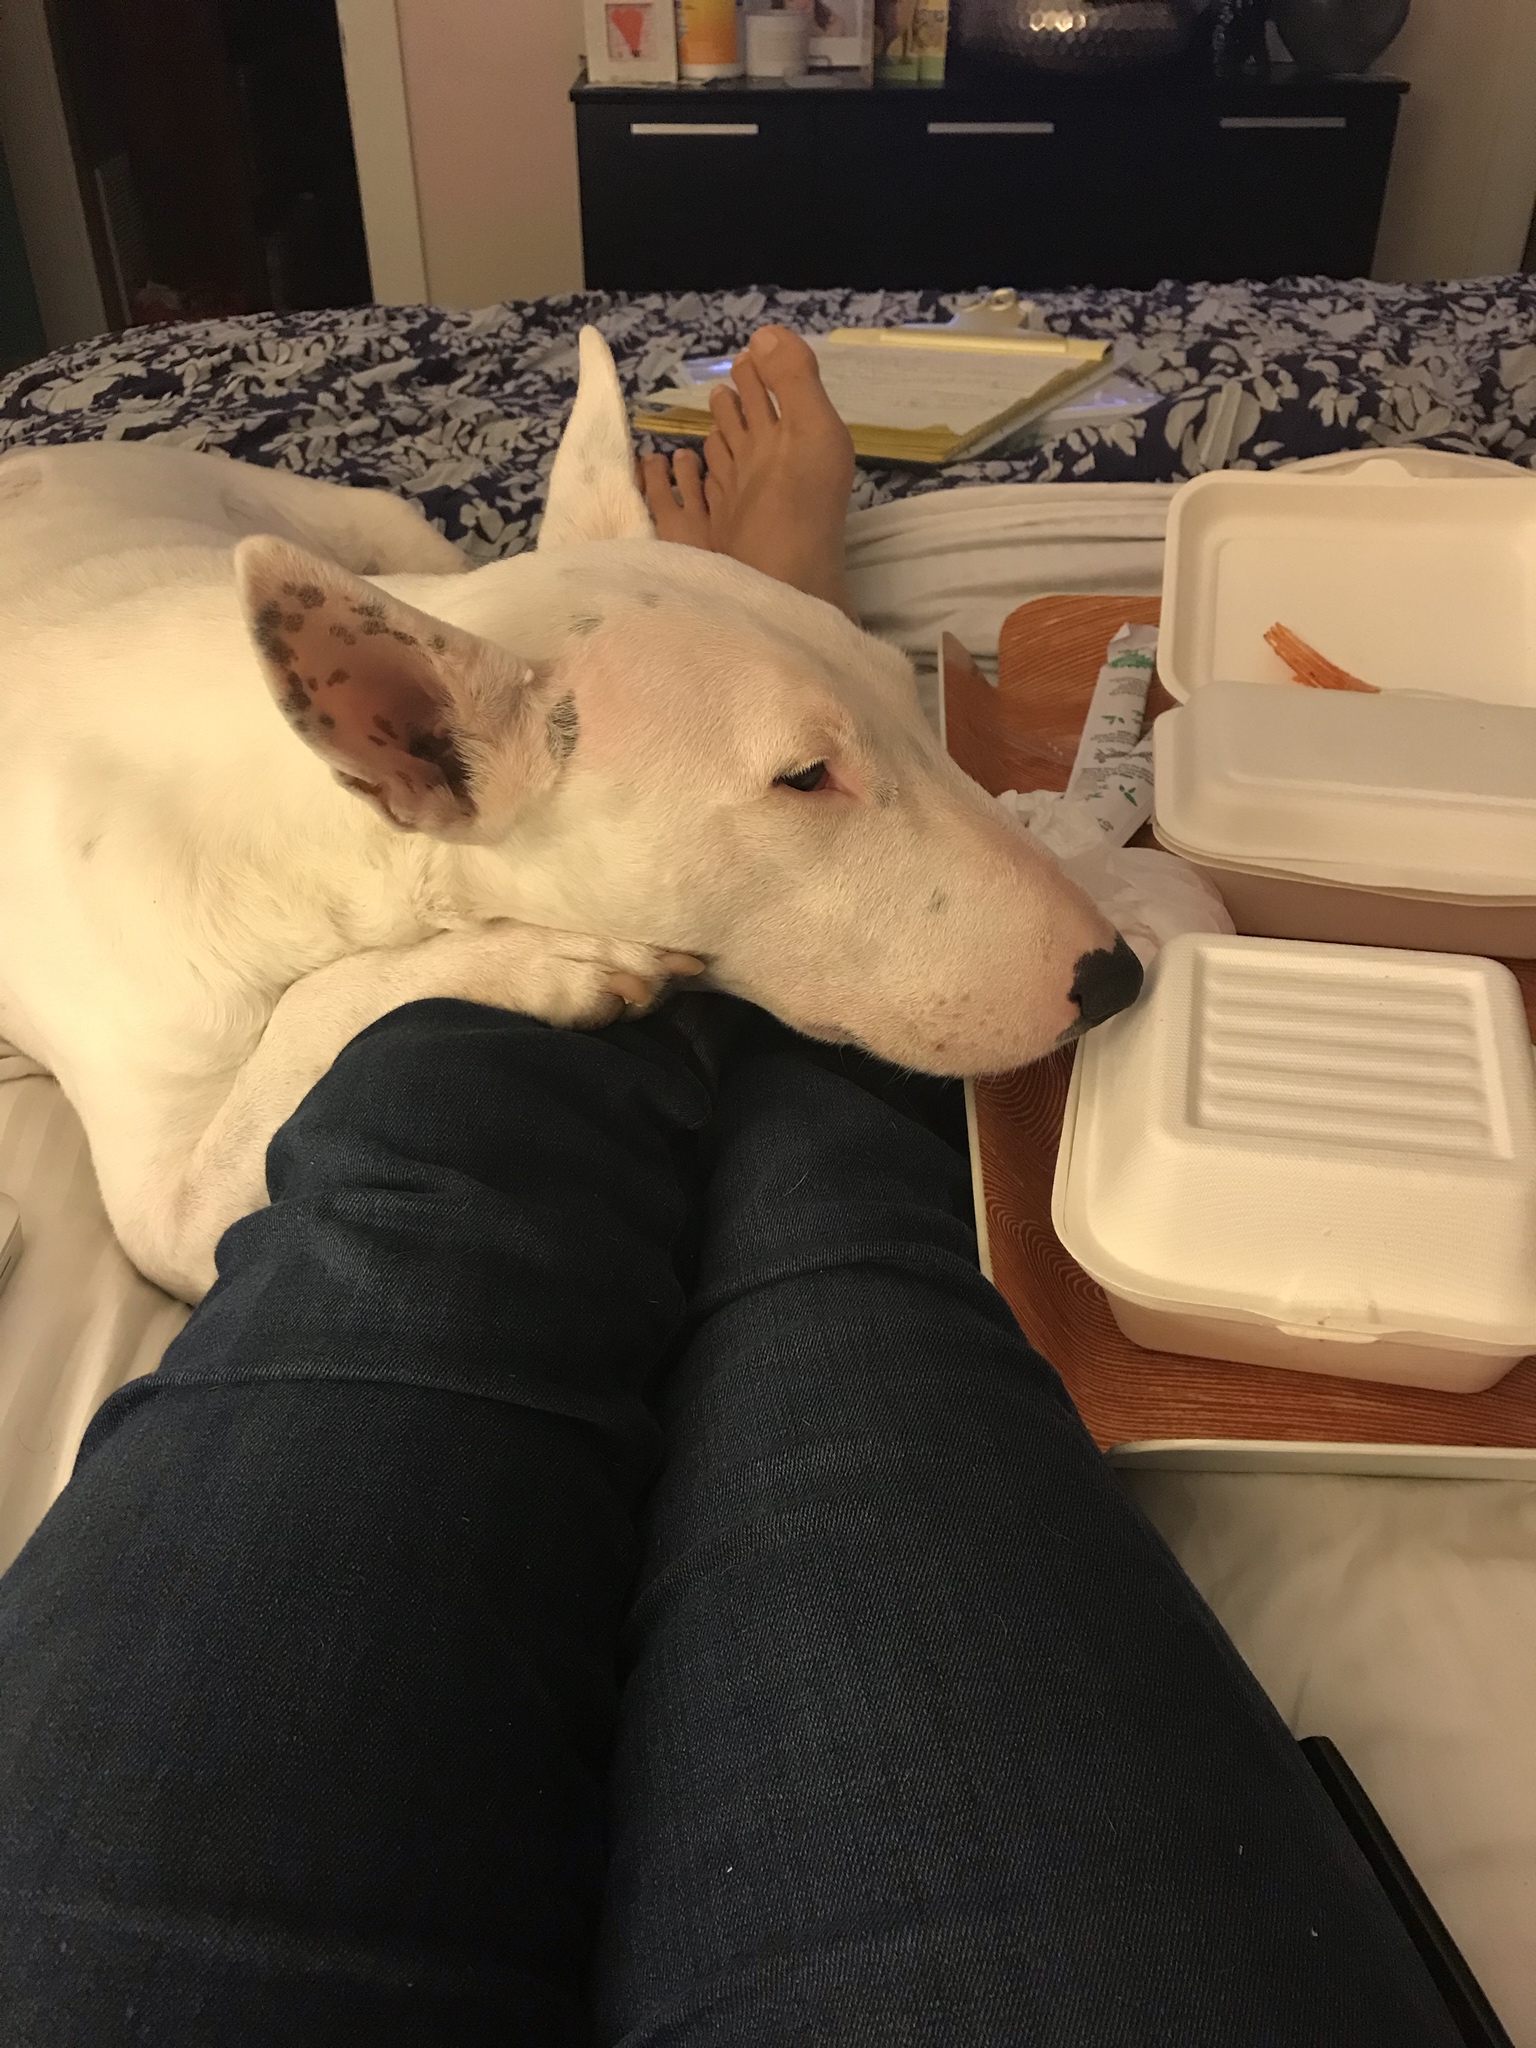 Bull Terrier lying with its face on top of the legs of its owner close the food on the tray